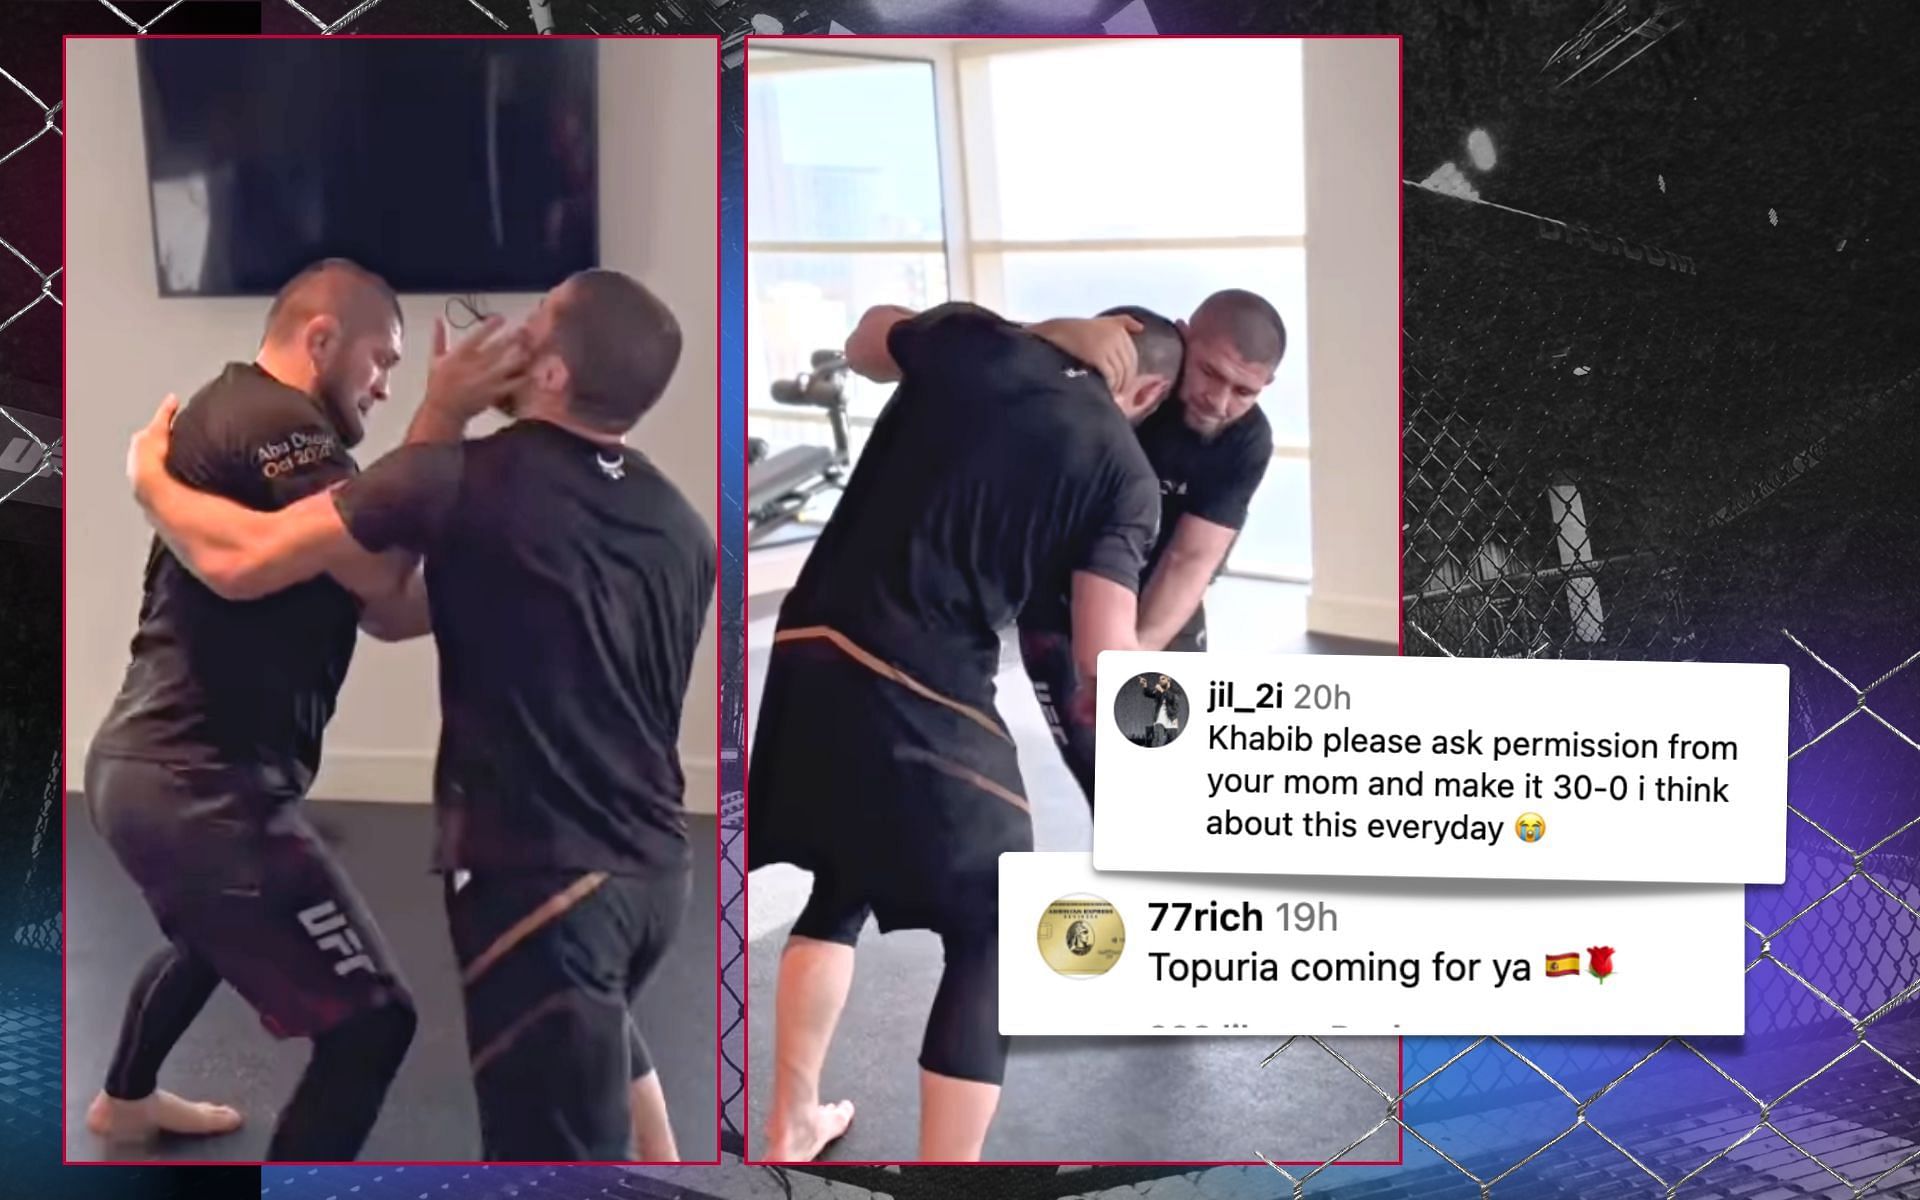 Khabib Nurmagomedov (left) engages in a wrestling session with Islam Makahchev (right); fans react. [Image credits: @juraze on Instagram]